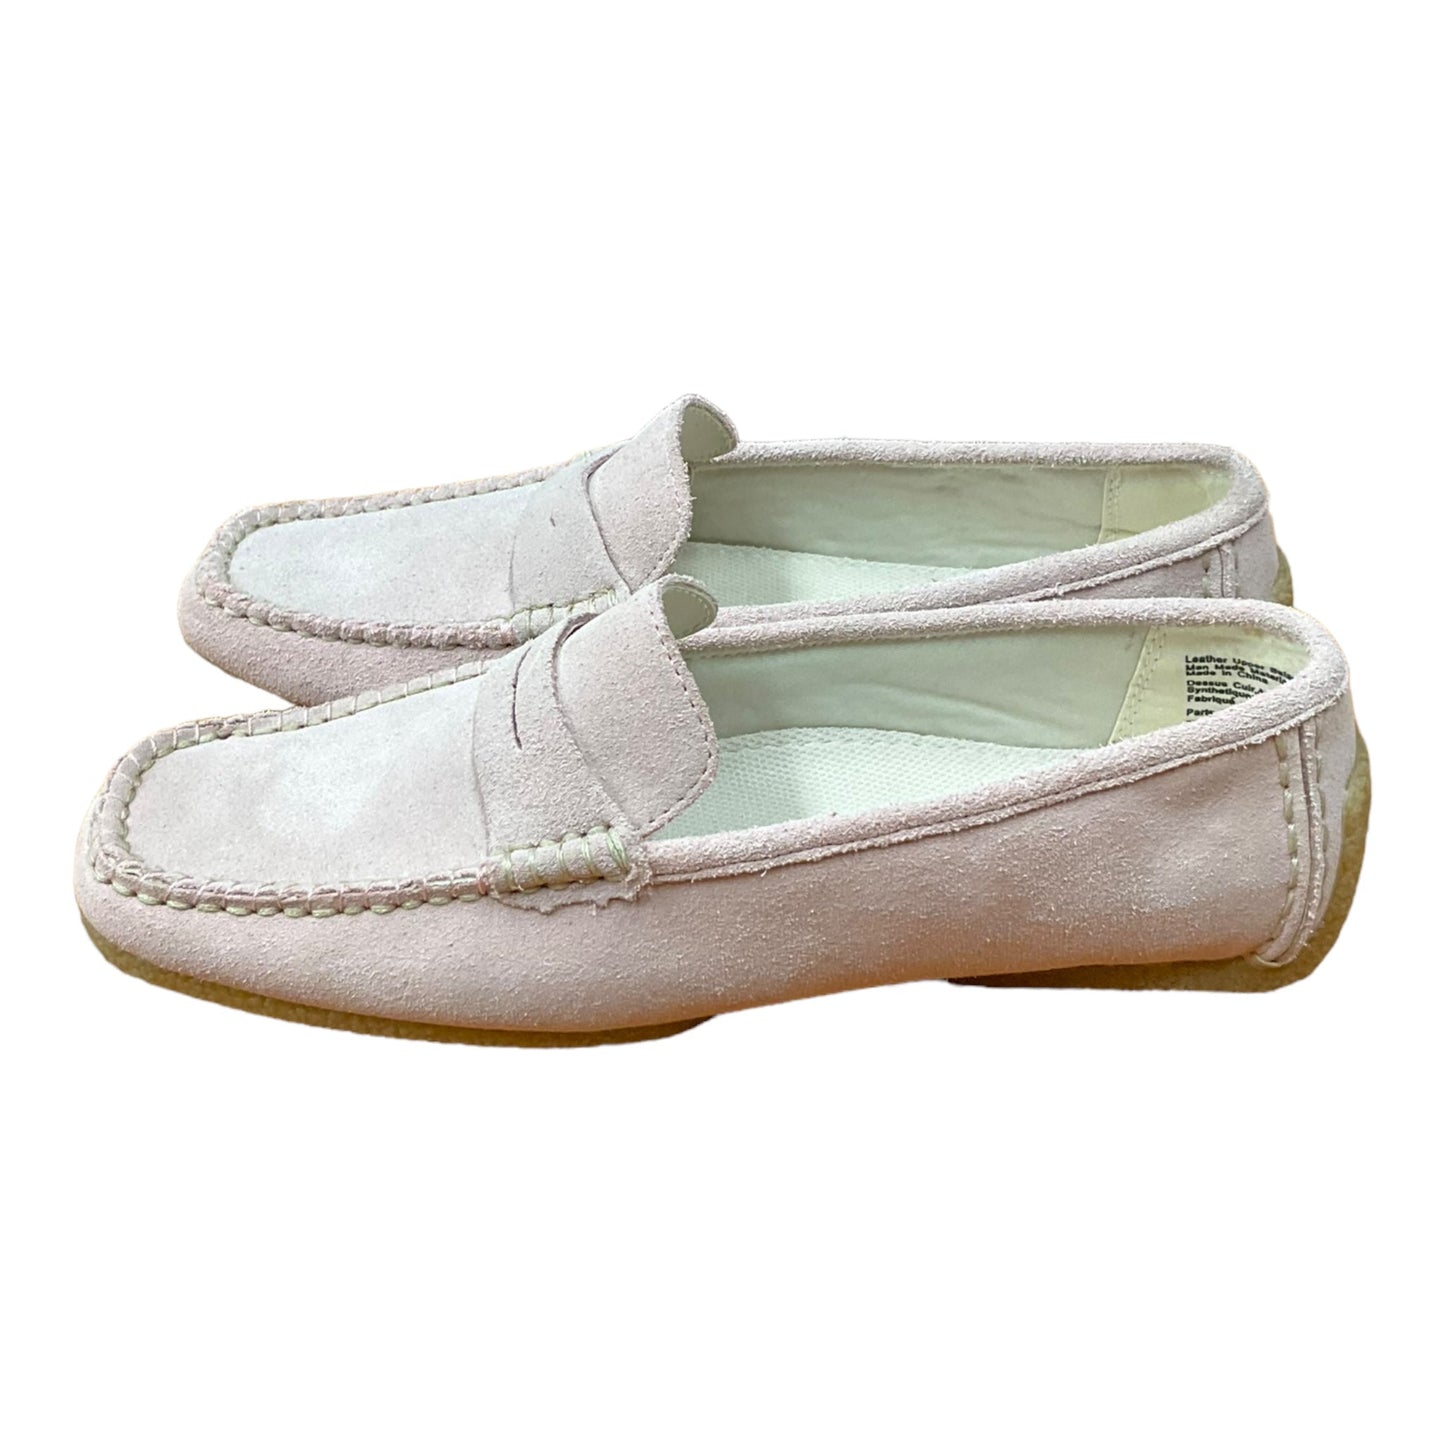 Shoes Flats Loafer Oxford By Predictions  Size: 7.5